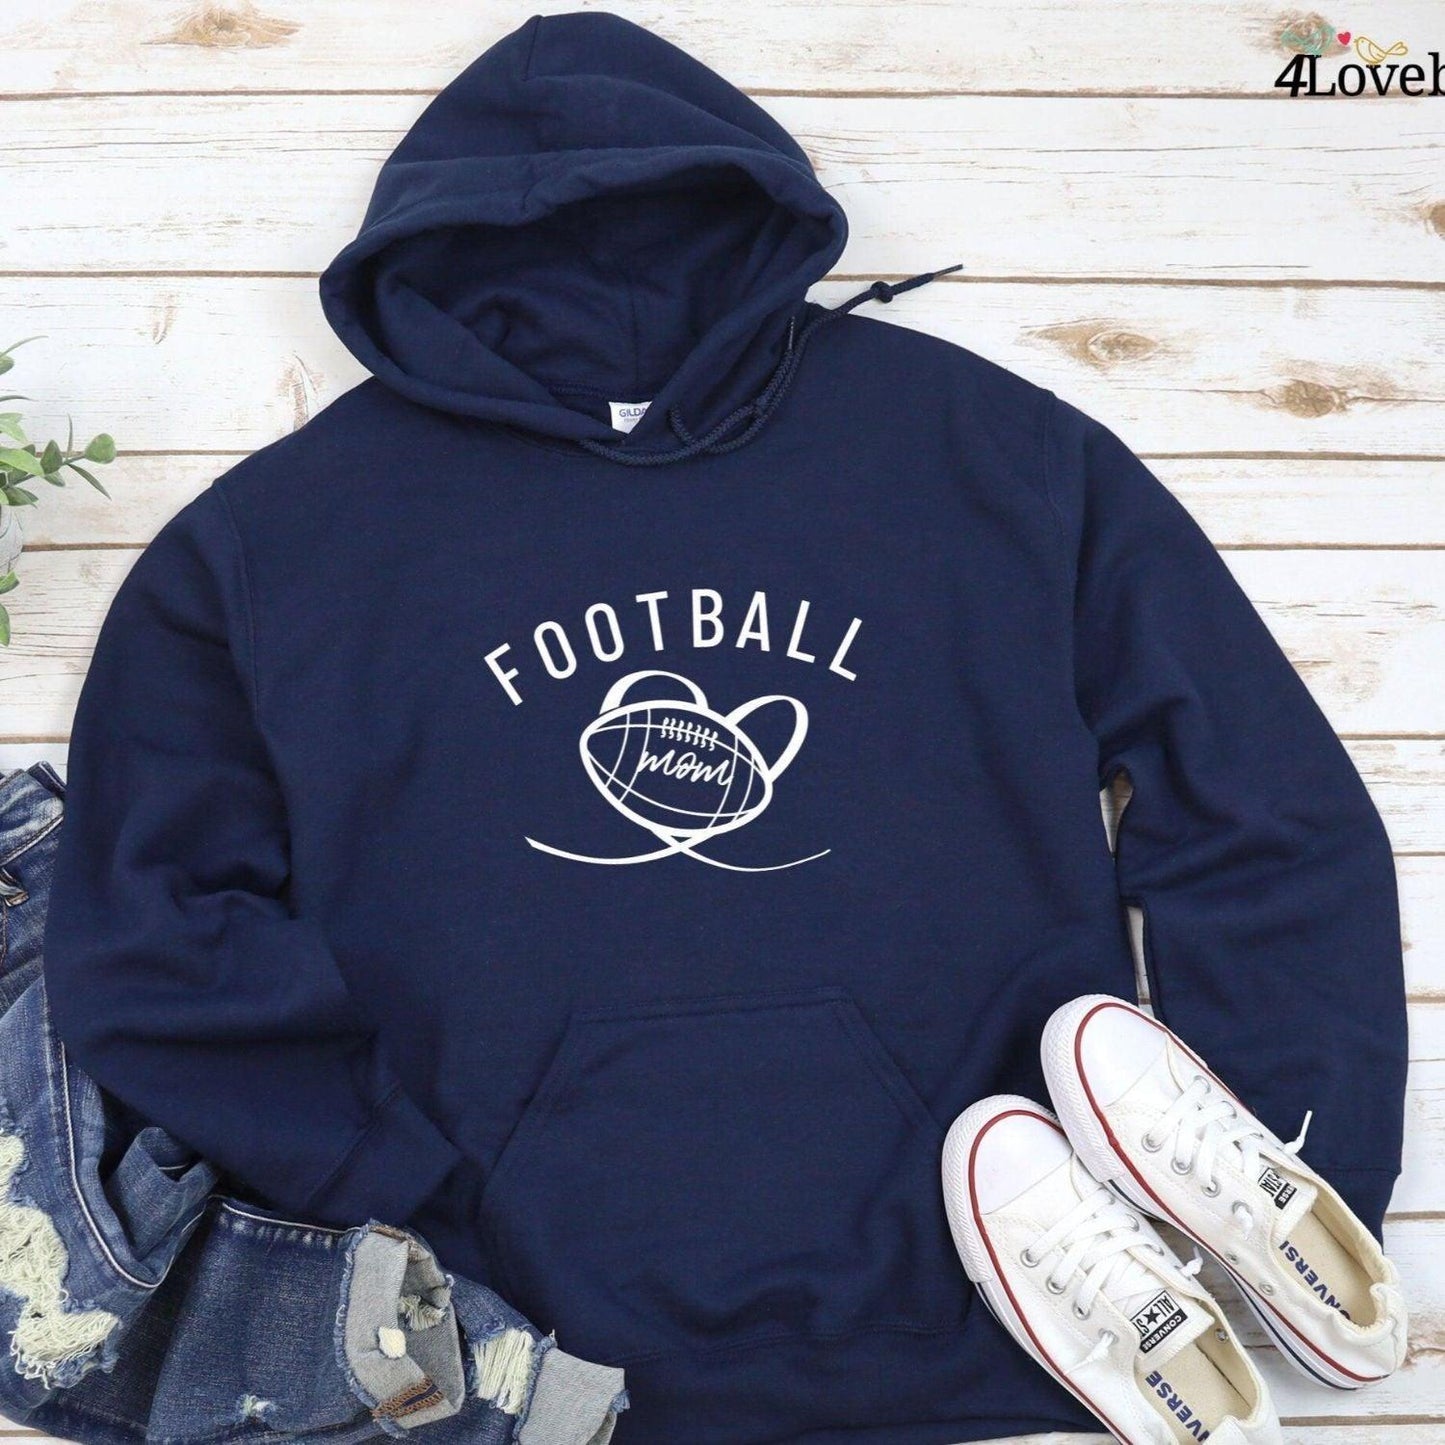 Football Game Day Outfits: Cozy Matching Set for Mom & Dad - Vibes Combo Edition - 4Lovebirds